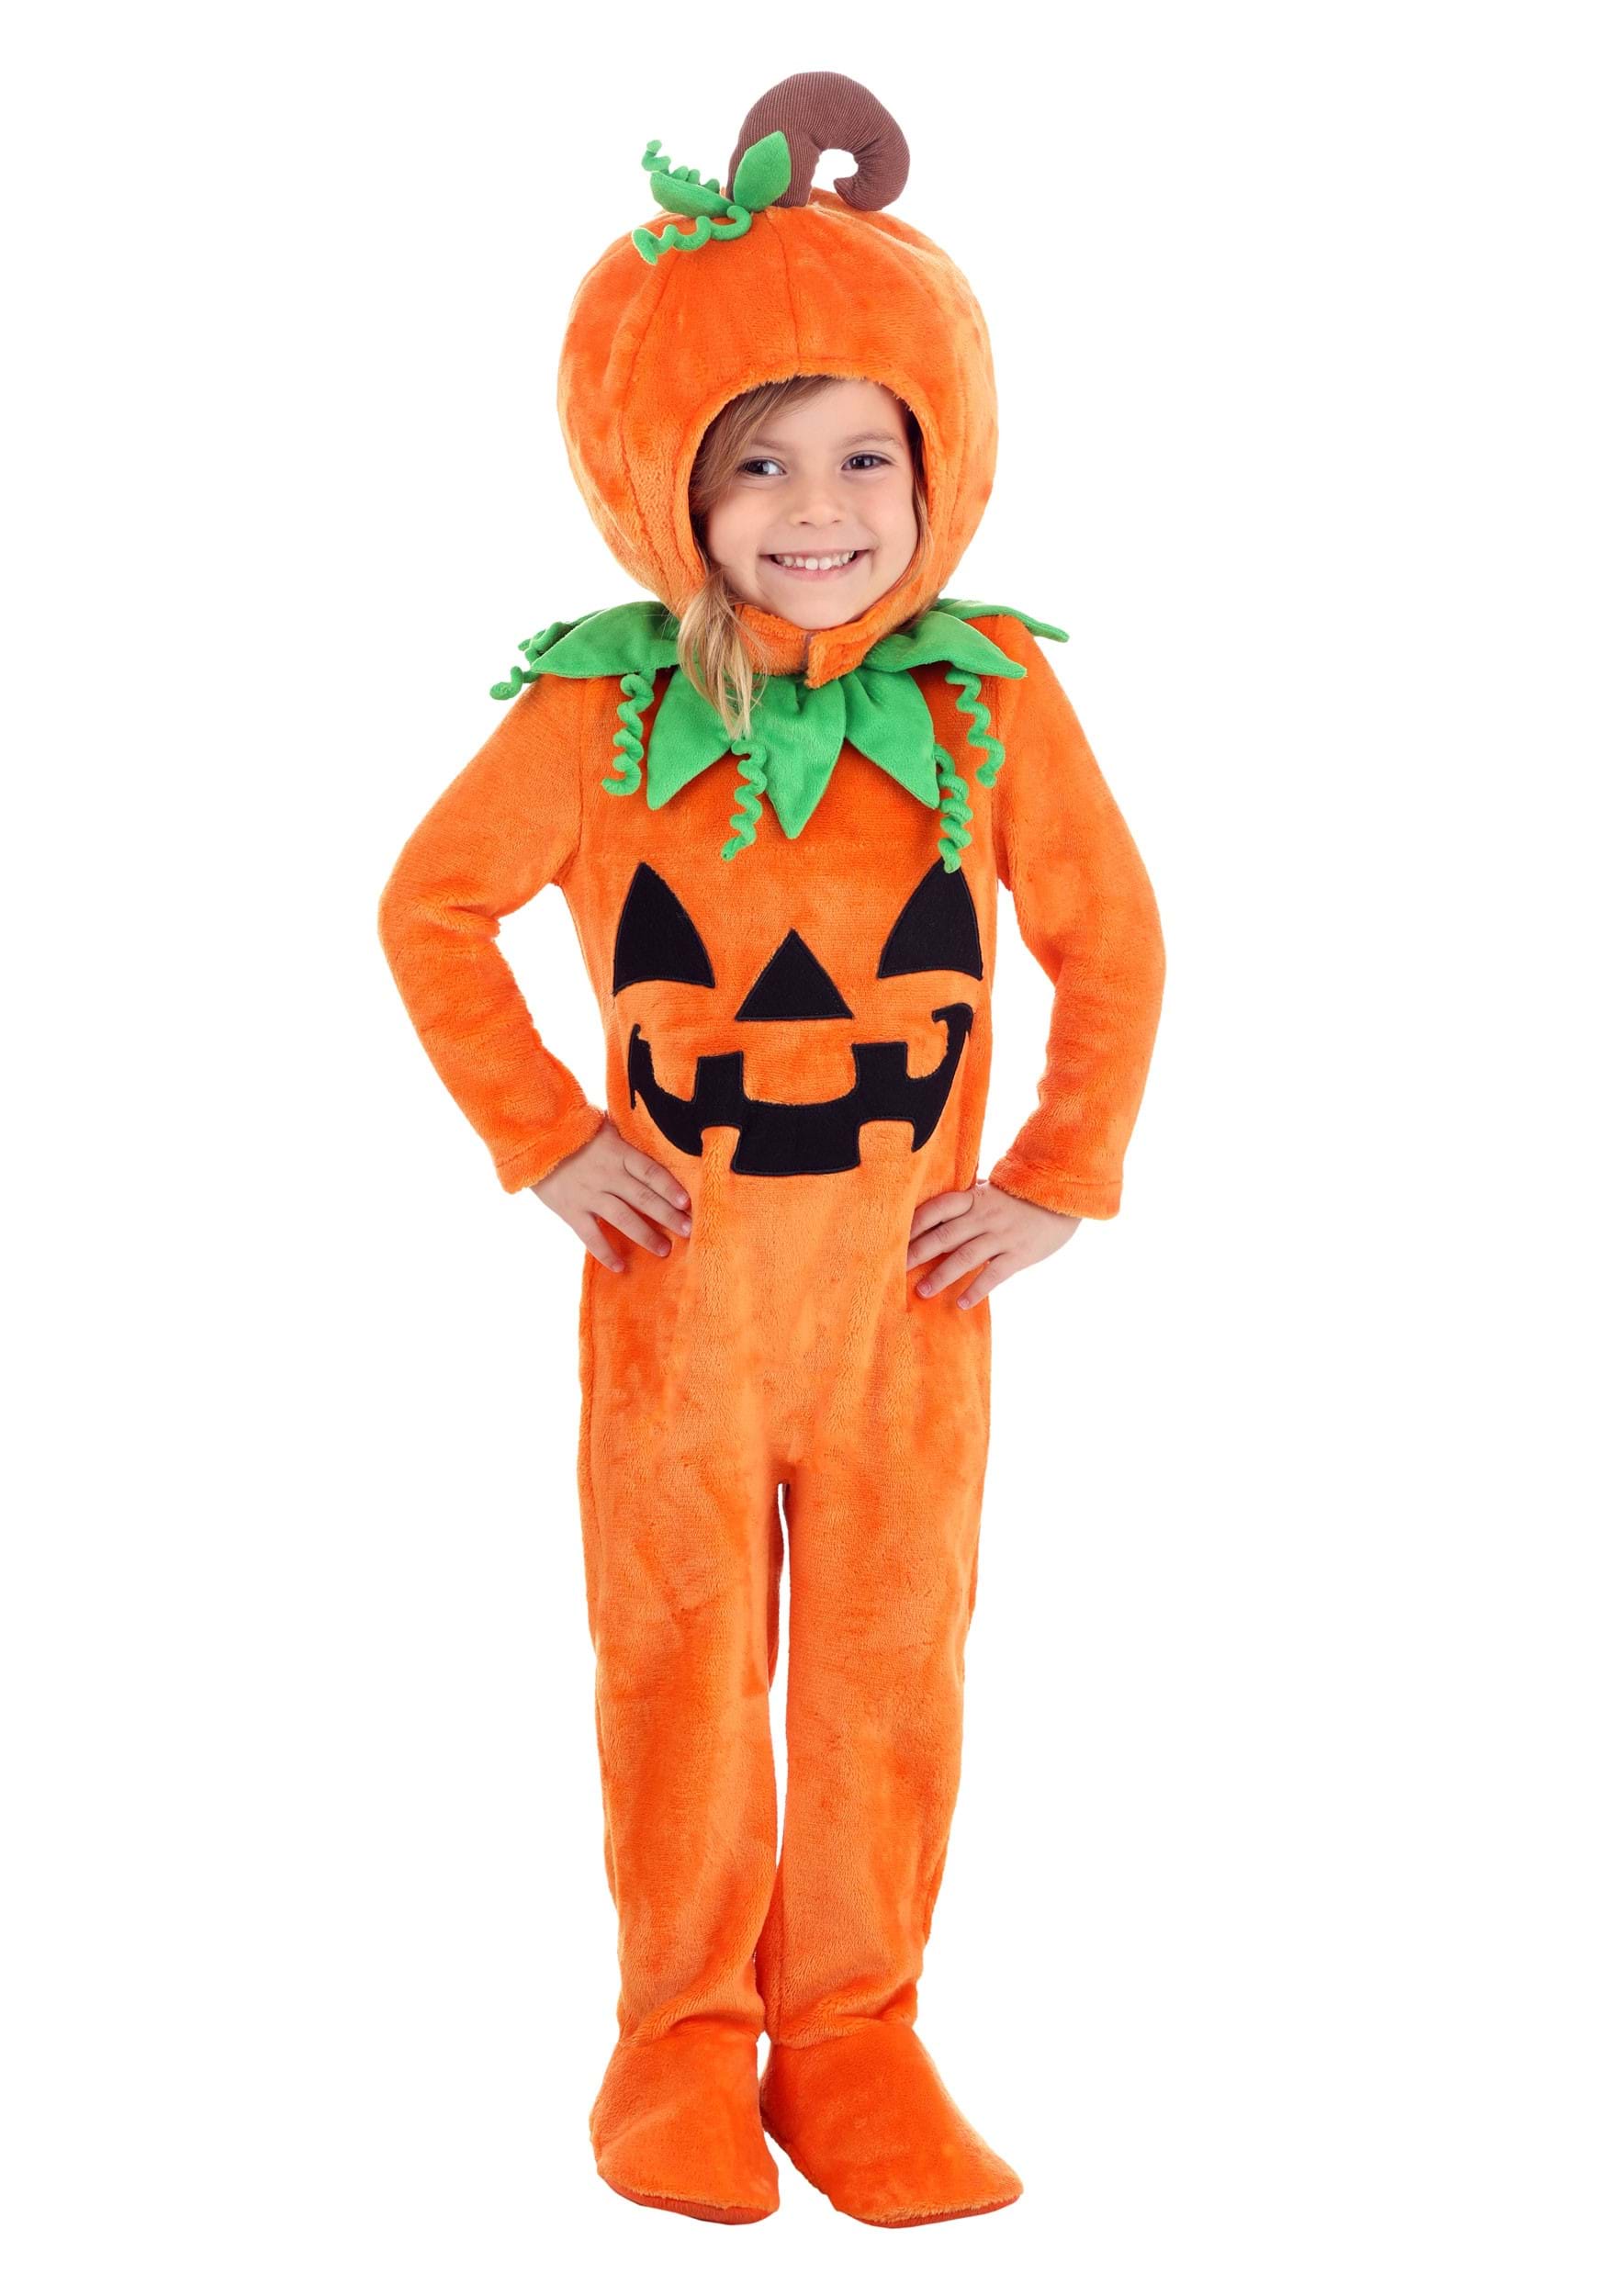 Prize Pumpkin Costume For Toddlers